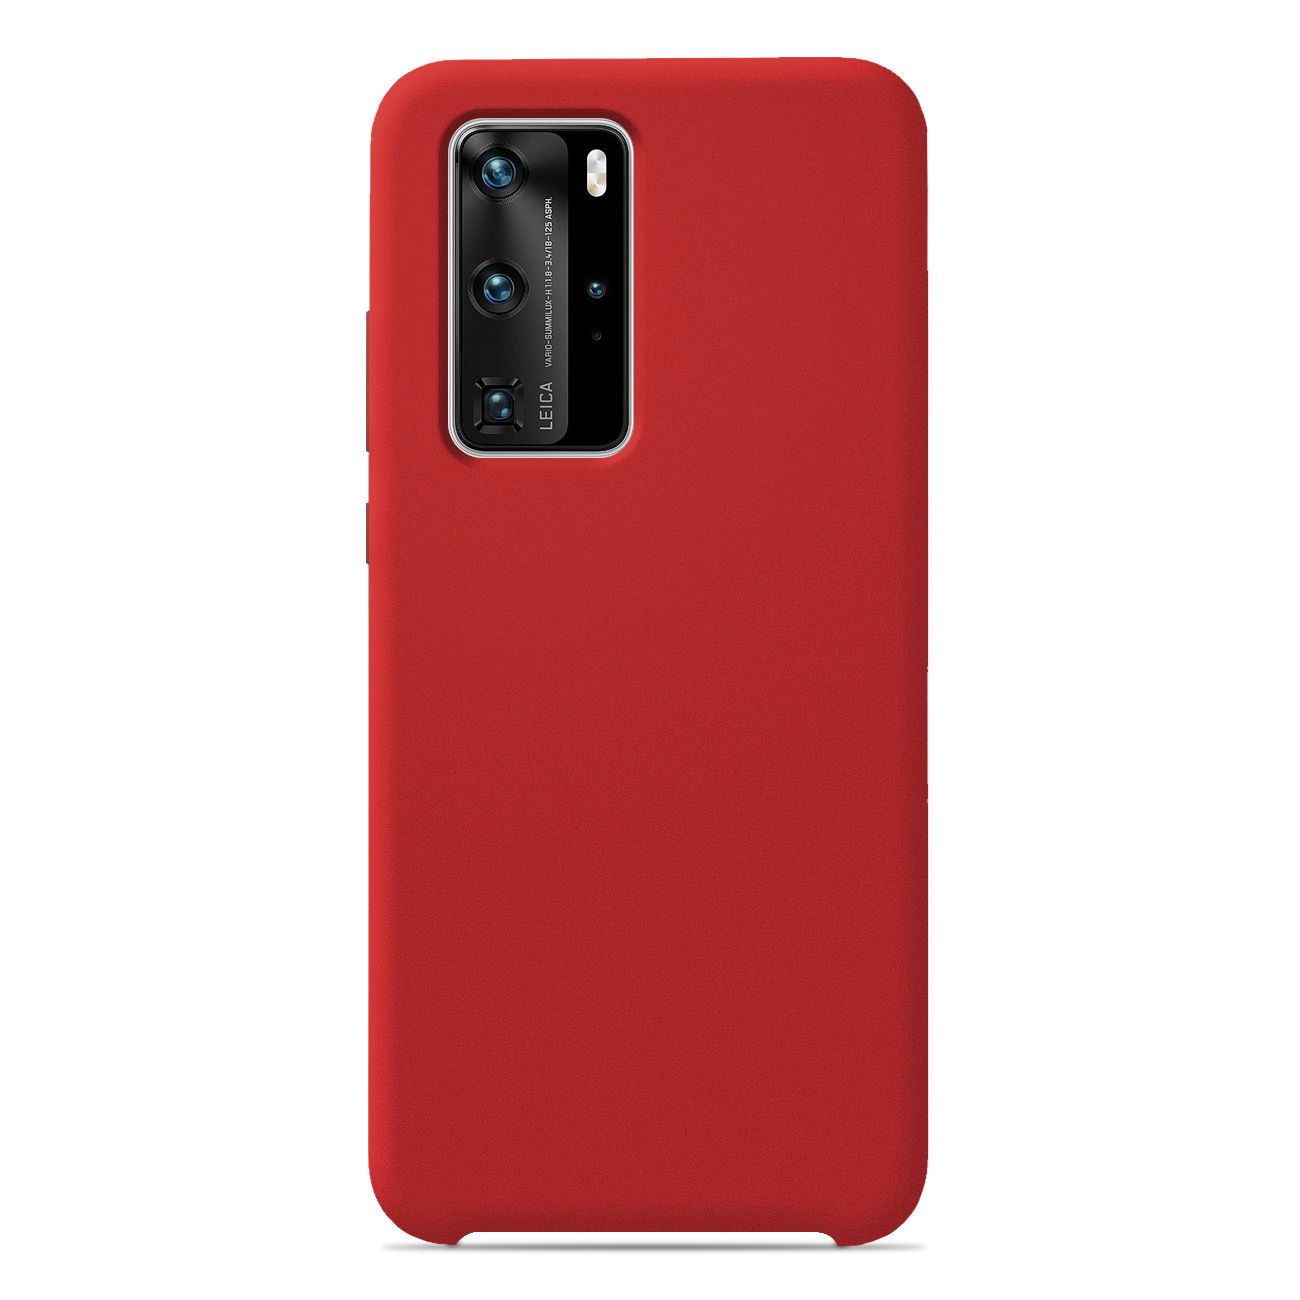 Coque silicone unie Soft Touch Rouge compatible Huawei P40 Pro